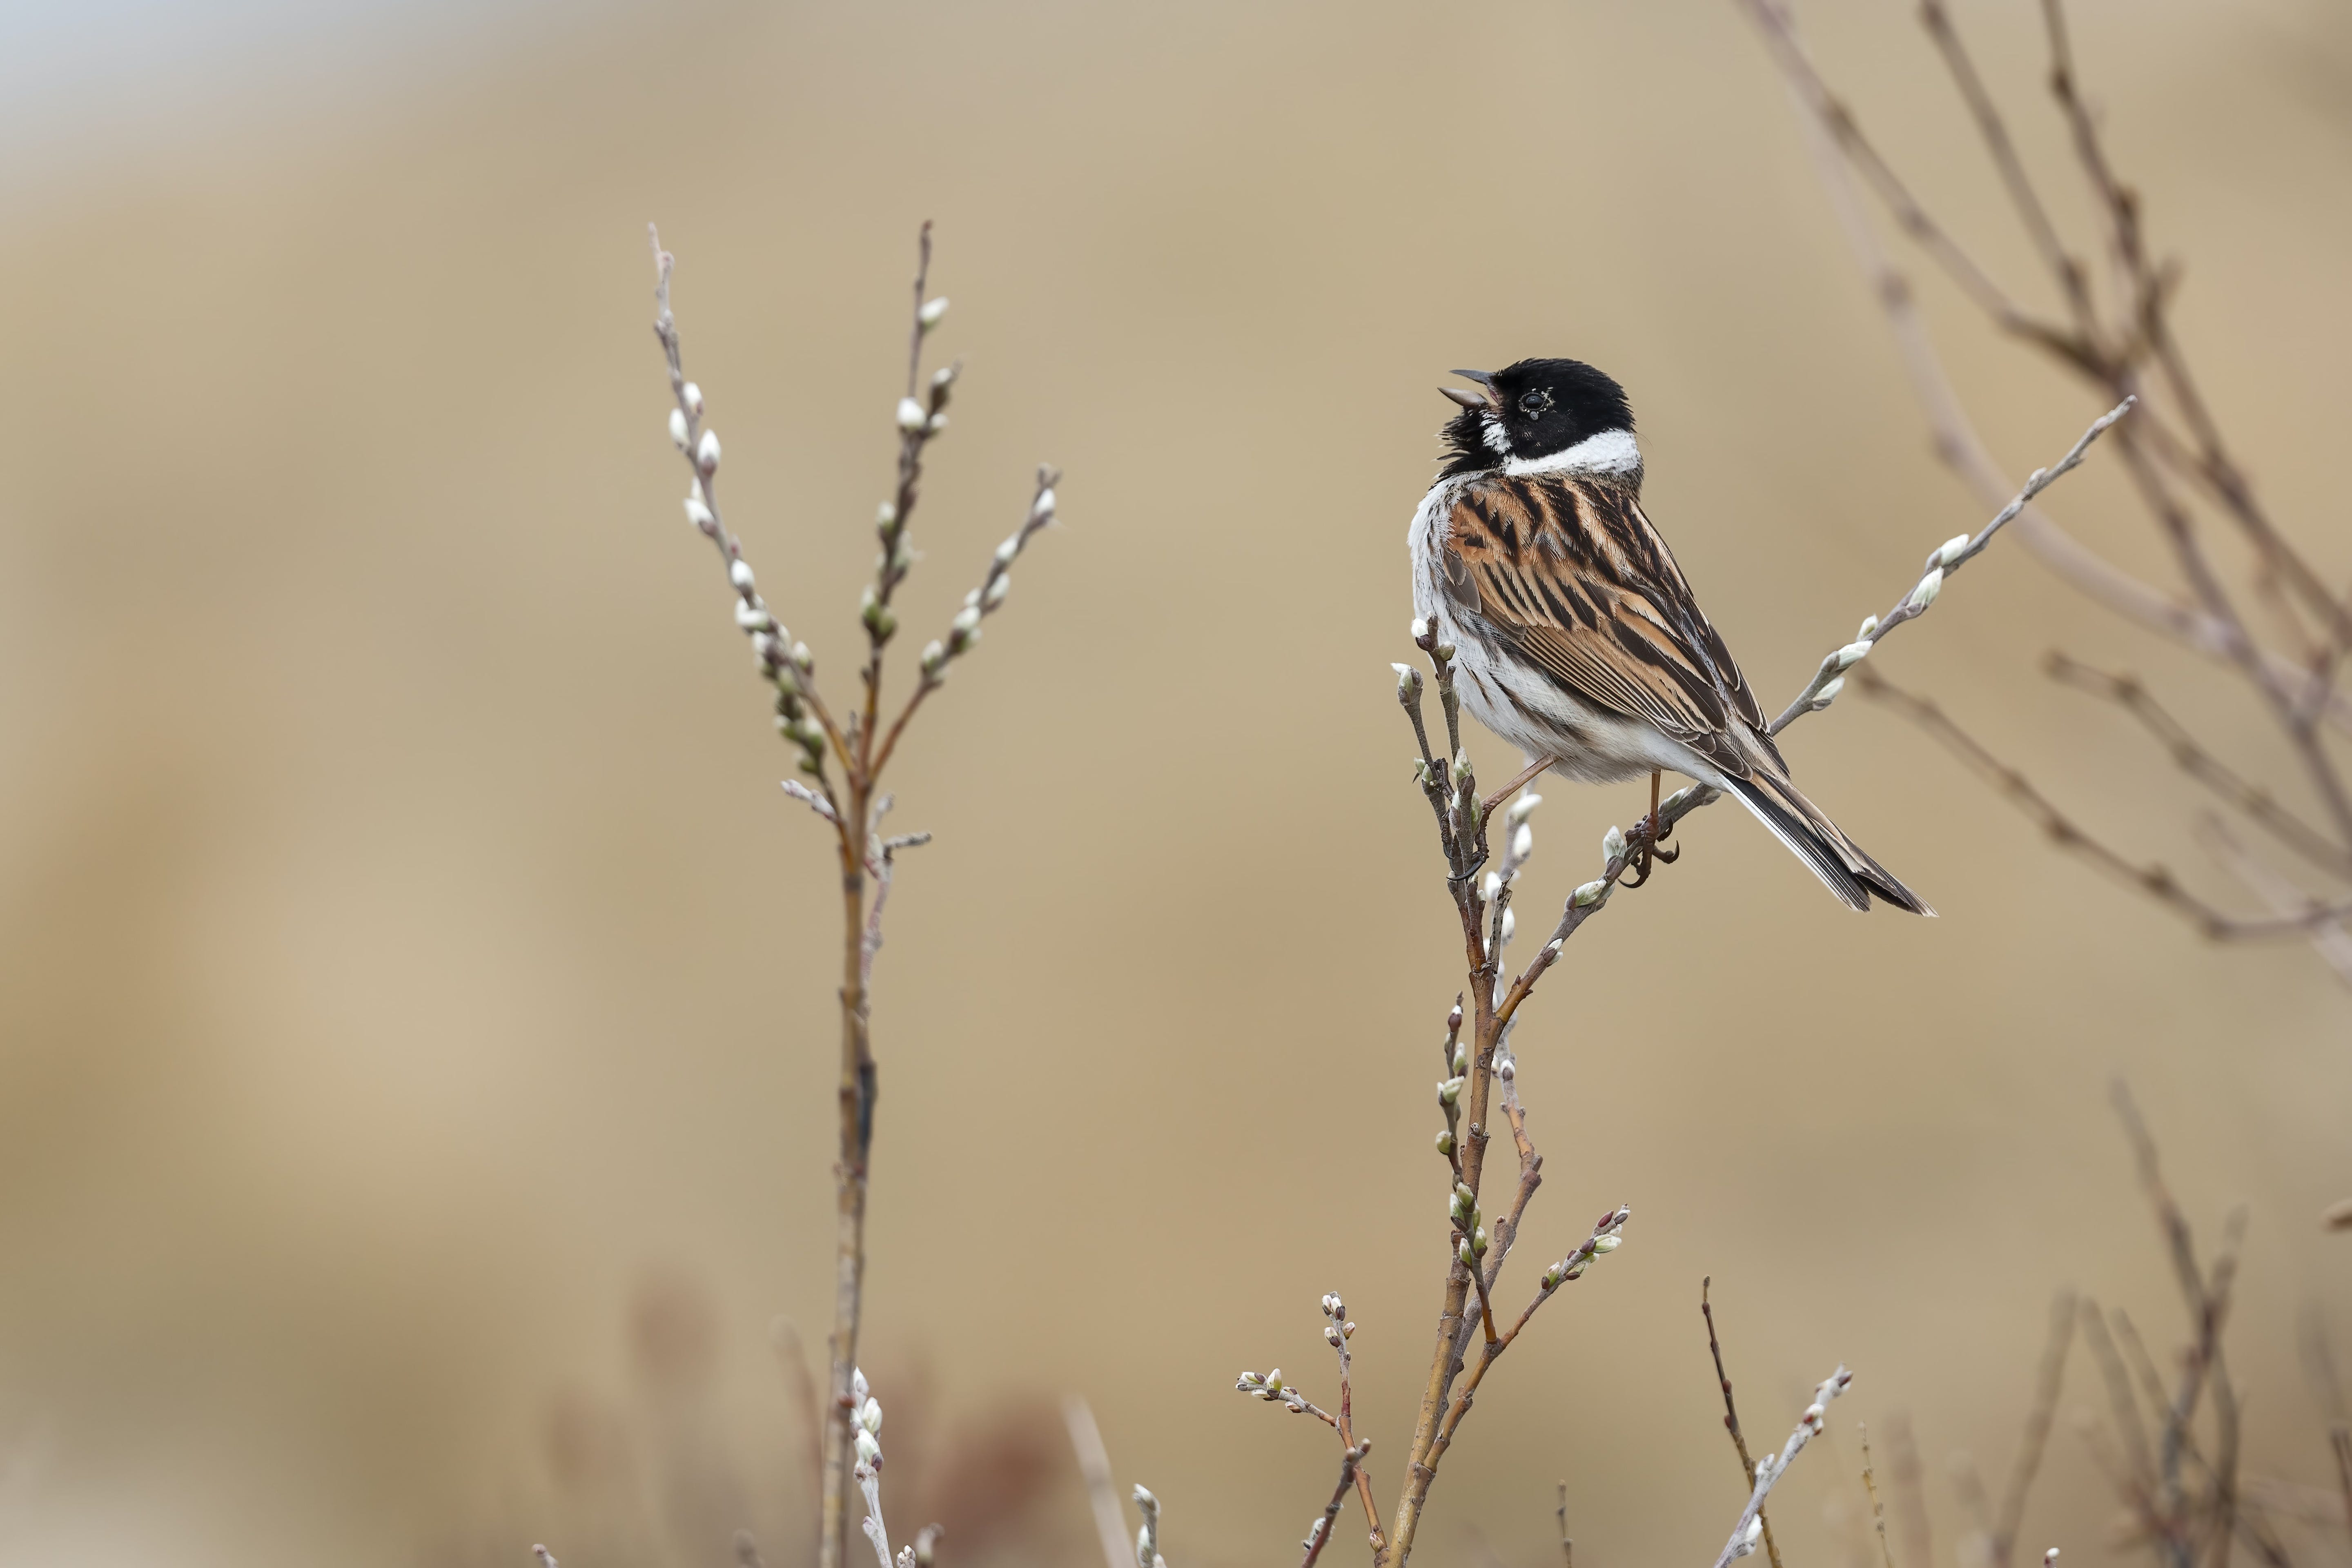 Reed bunting in song - photo by Photo by Hans Veth on Unsplash